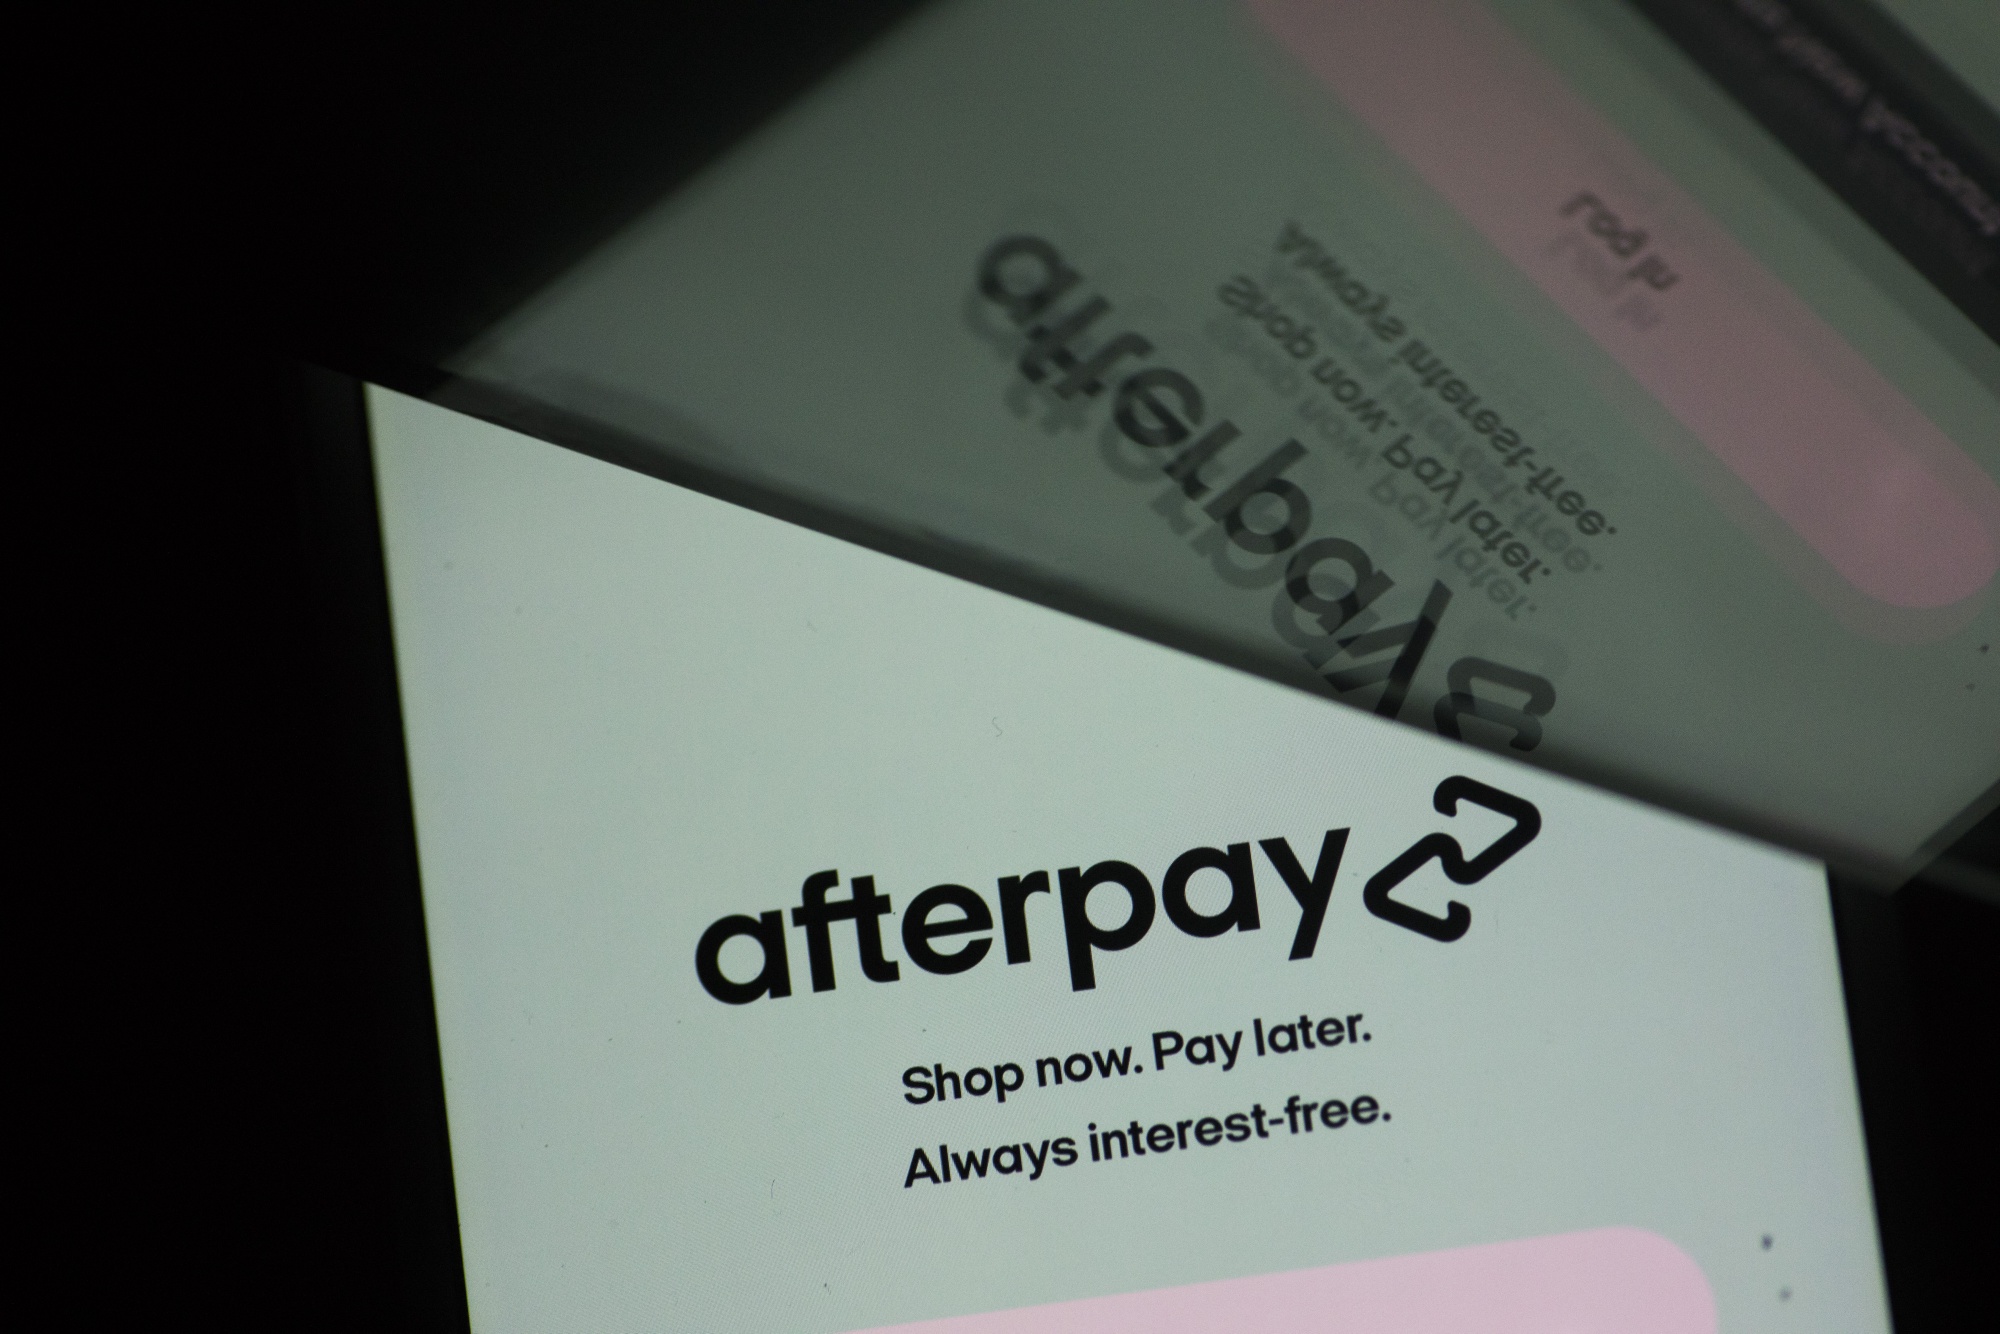 Square and Afterpay Rediscovered Grandma and Grandpa's Installment Plan -  Bloomberg